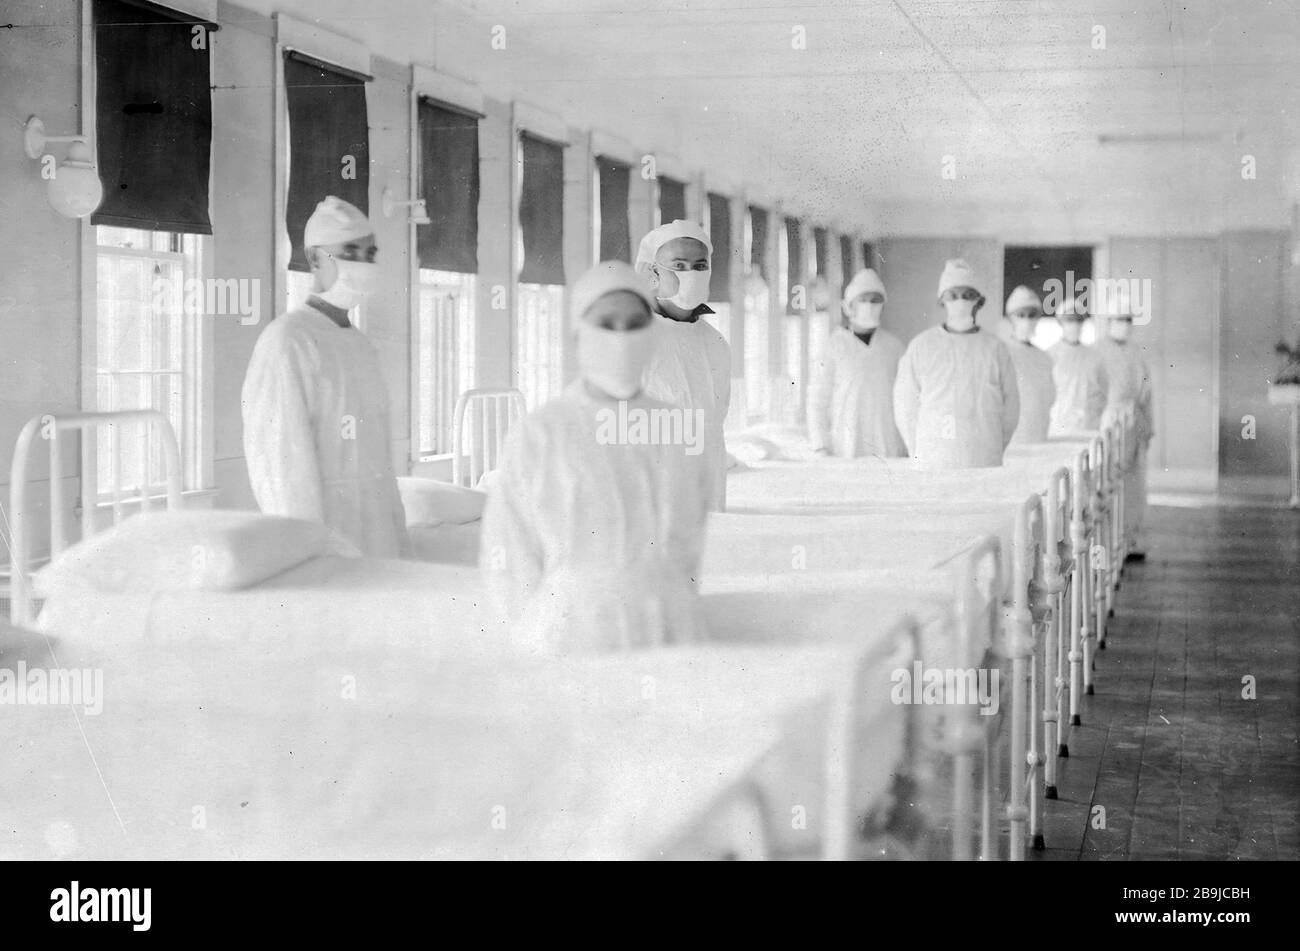 U.S. Naval Hospital. Corpsmen in cap and gown ready to attend patients in influenza ward. Mare Island, California, 12/10/1918. (U.S. Navy) 1918-1919. An epidemic of 'Spanish Flu' spread around the world. At least 20 million died, although some estimates put the final toll at 50 million. Stock Photo